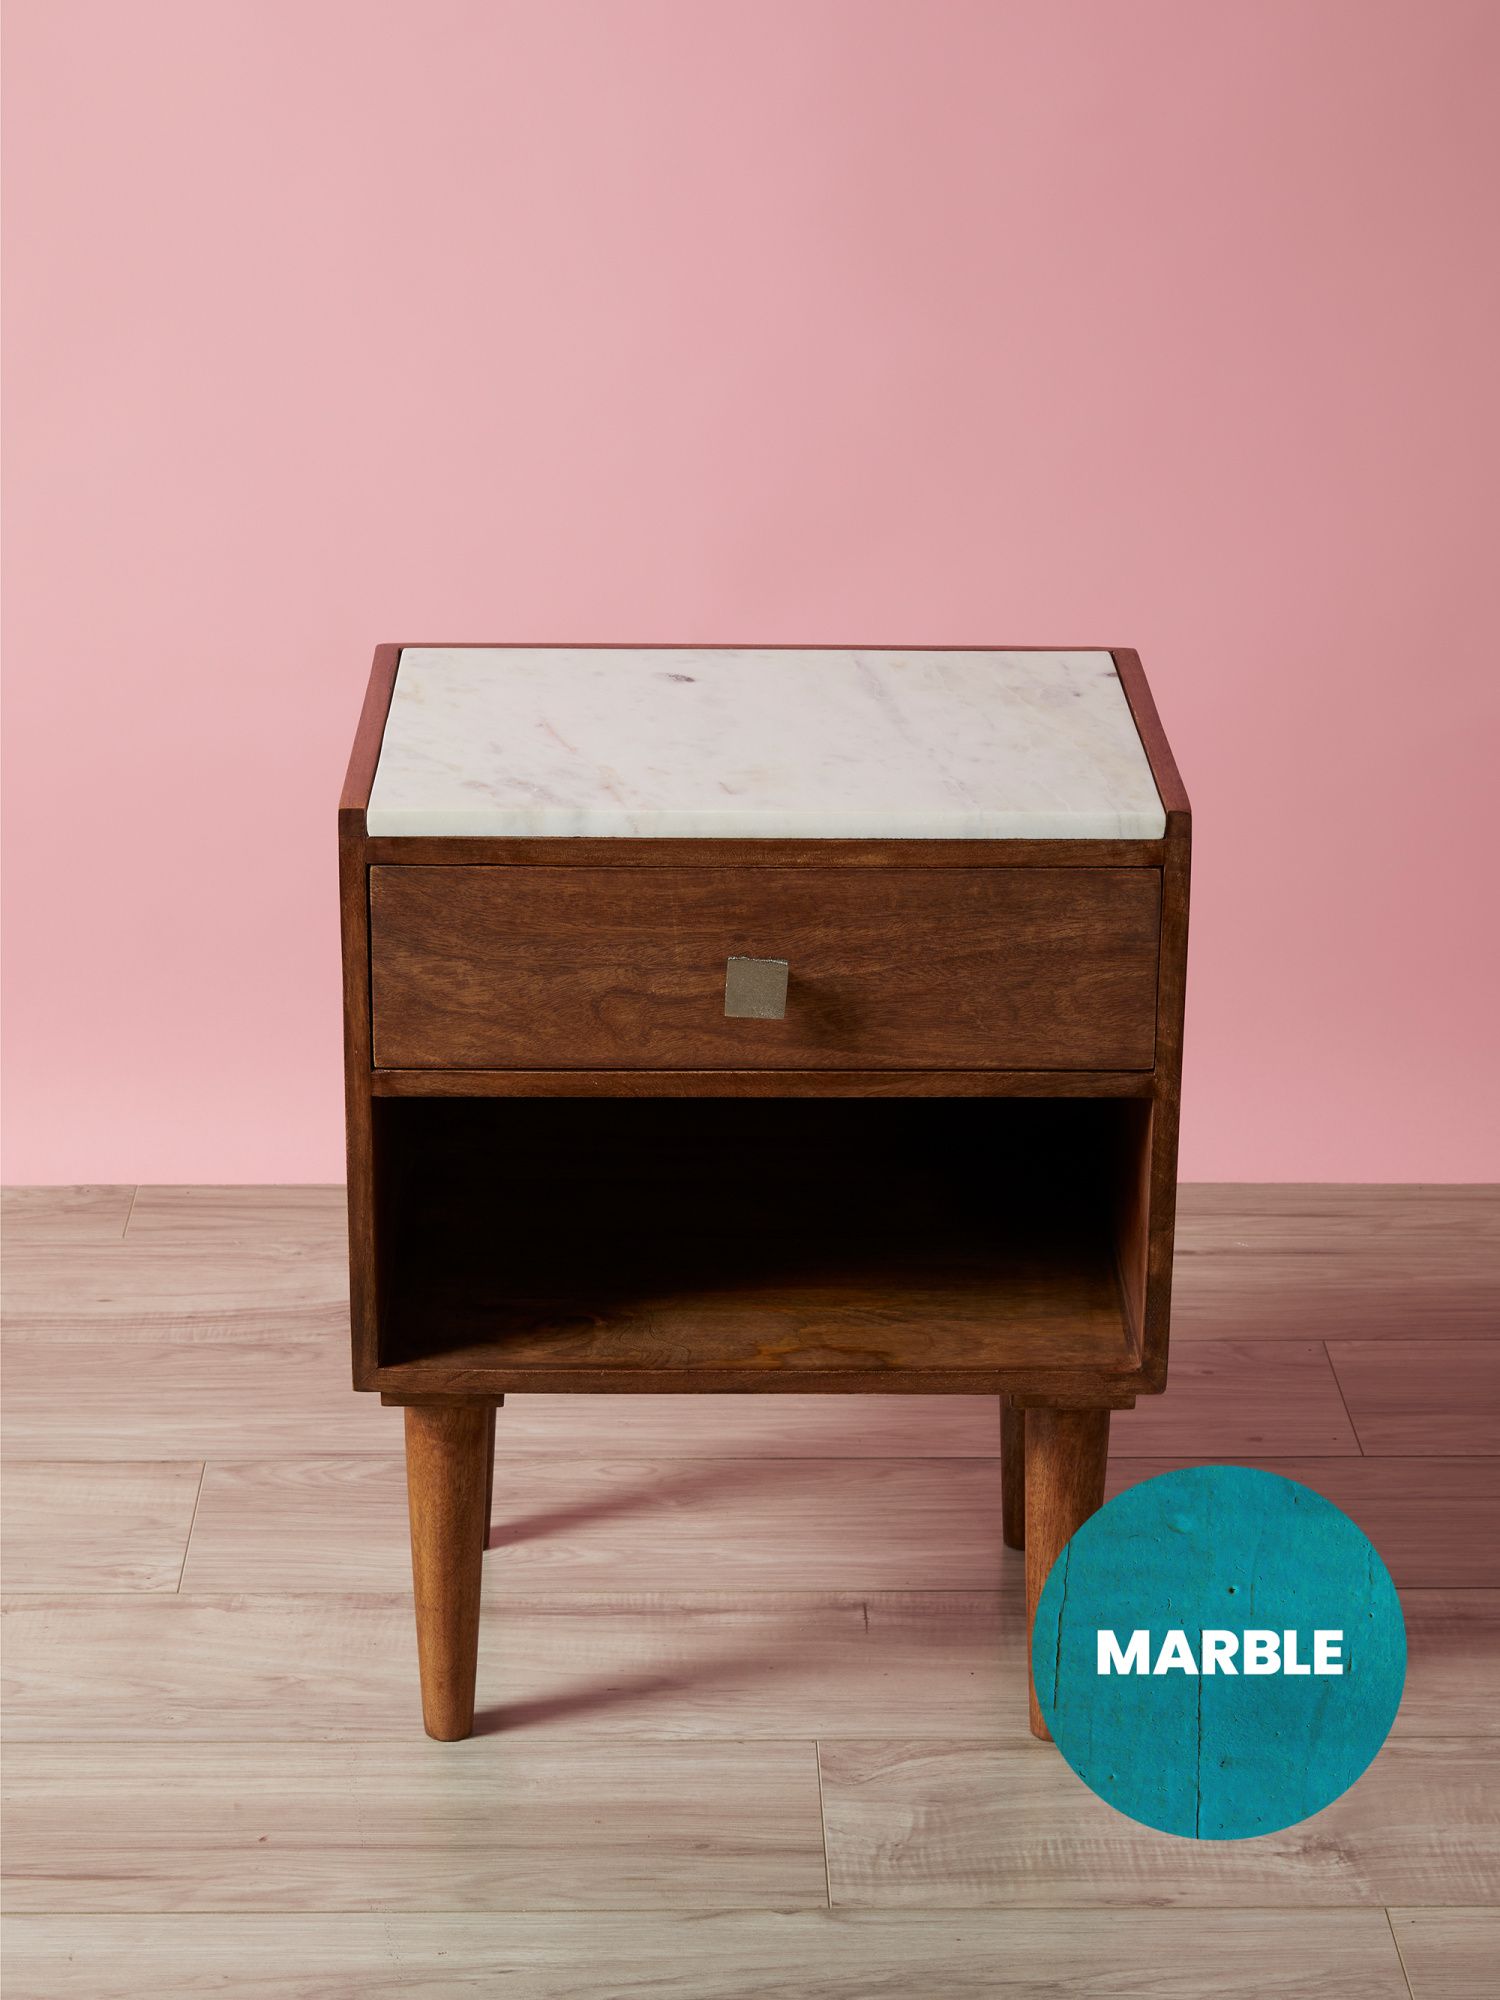 18x23 Marble Top Side Table | Made In India | HomeGoods | HomeGoods